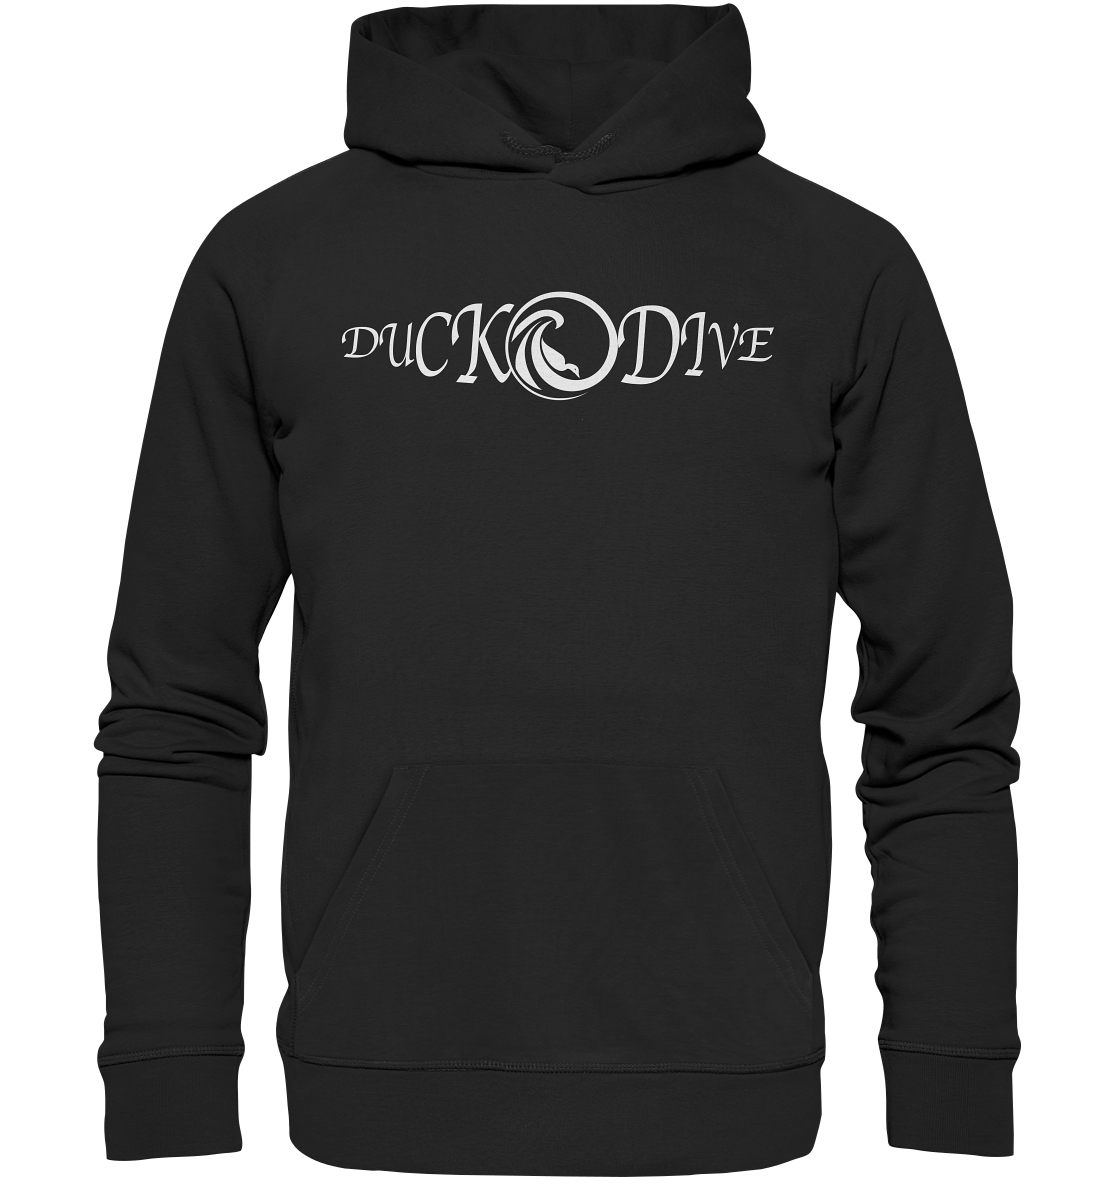 A - Duck Dive III - Organic Hoodie - Duck Dive Clothing